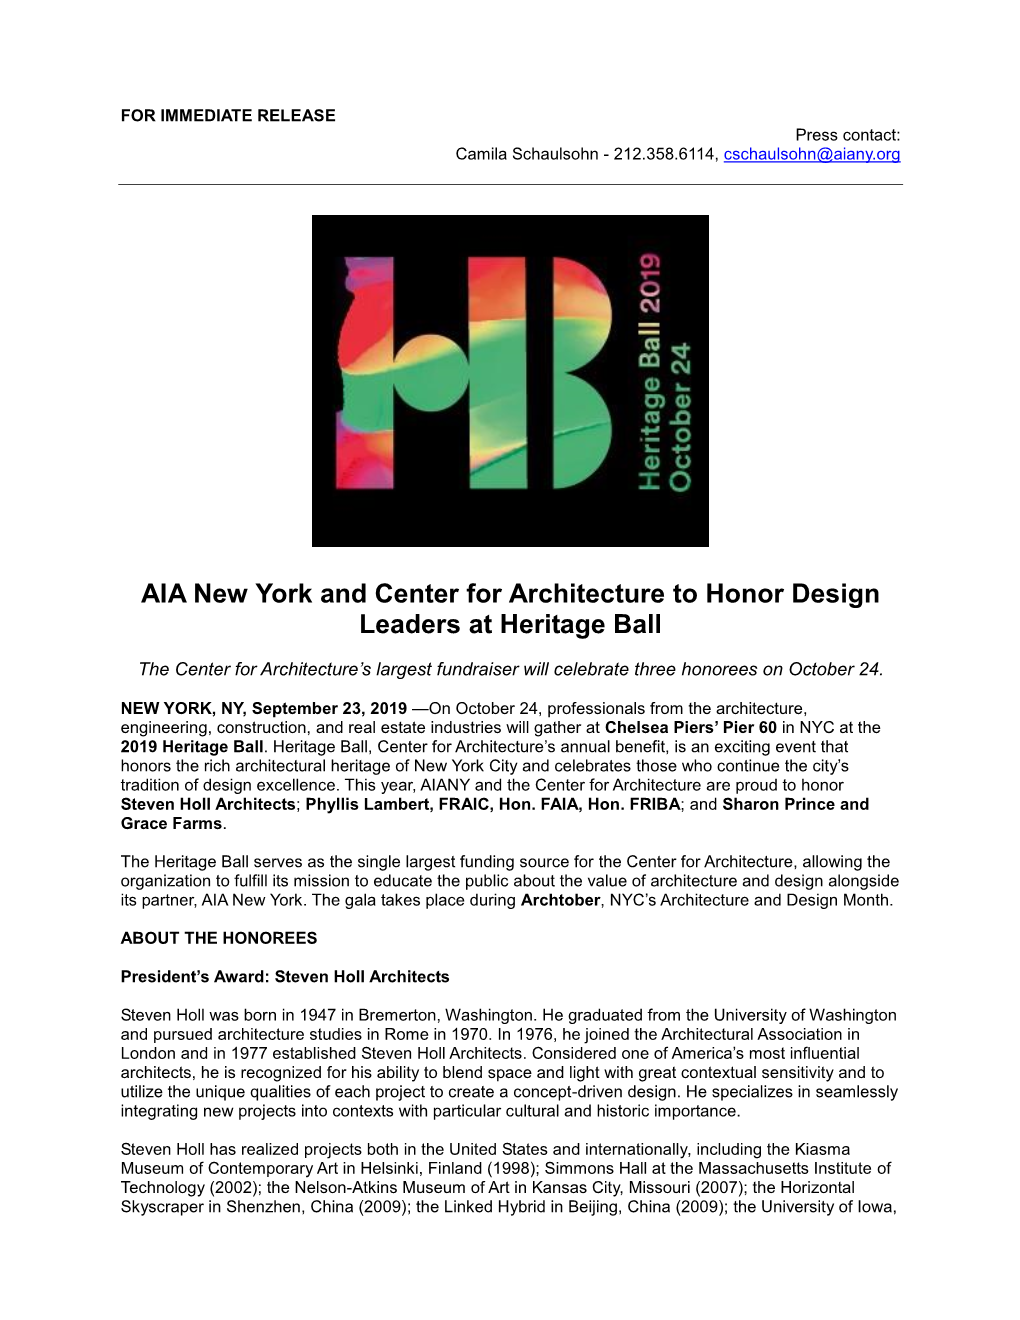 AIA New York and Center for Architecture to Honor Design Leaders at Heritage Ball